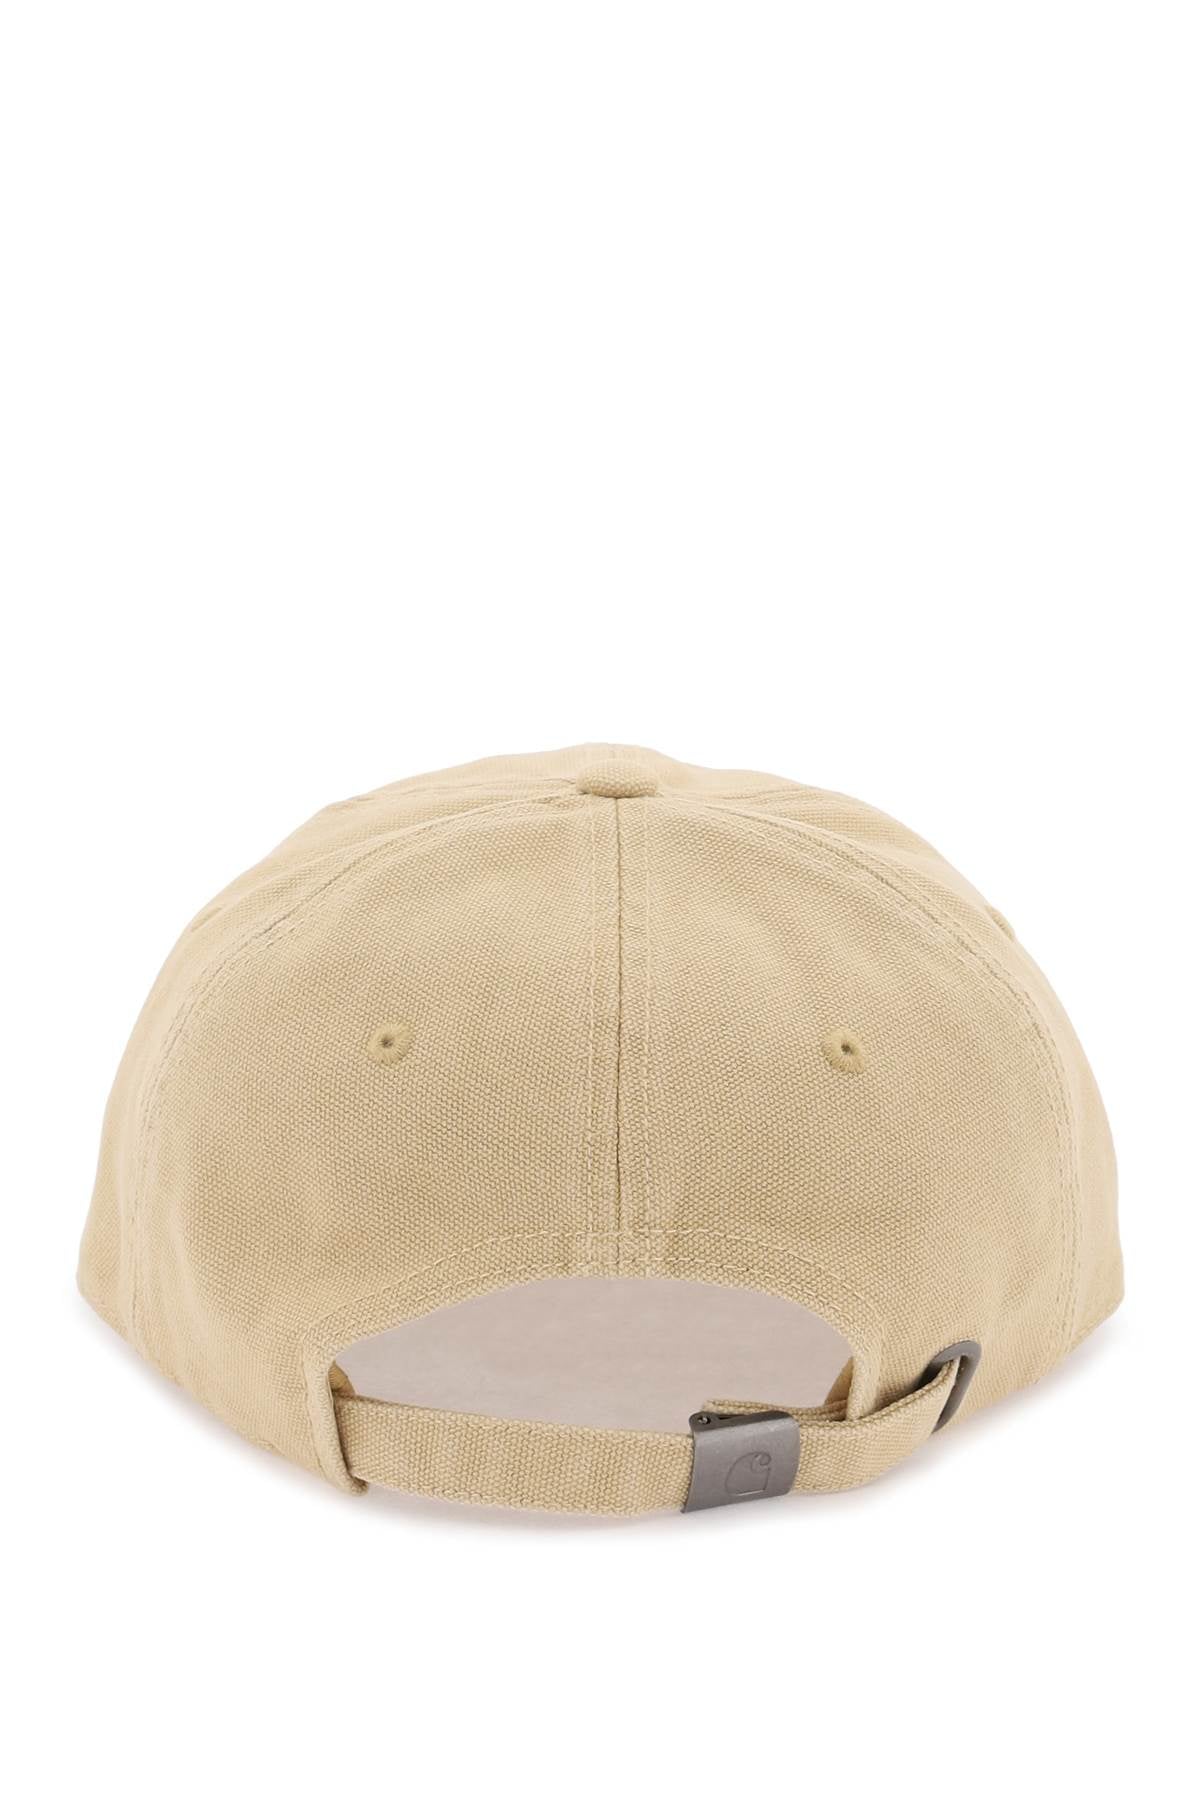 Carhartt Wip Icon Baseball Cap With Patch Logo   Beige